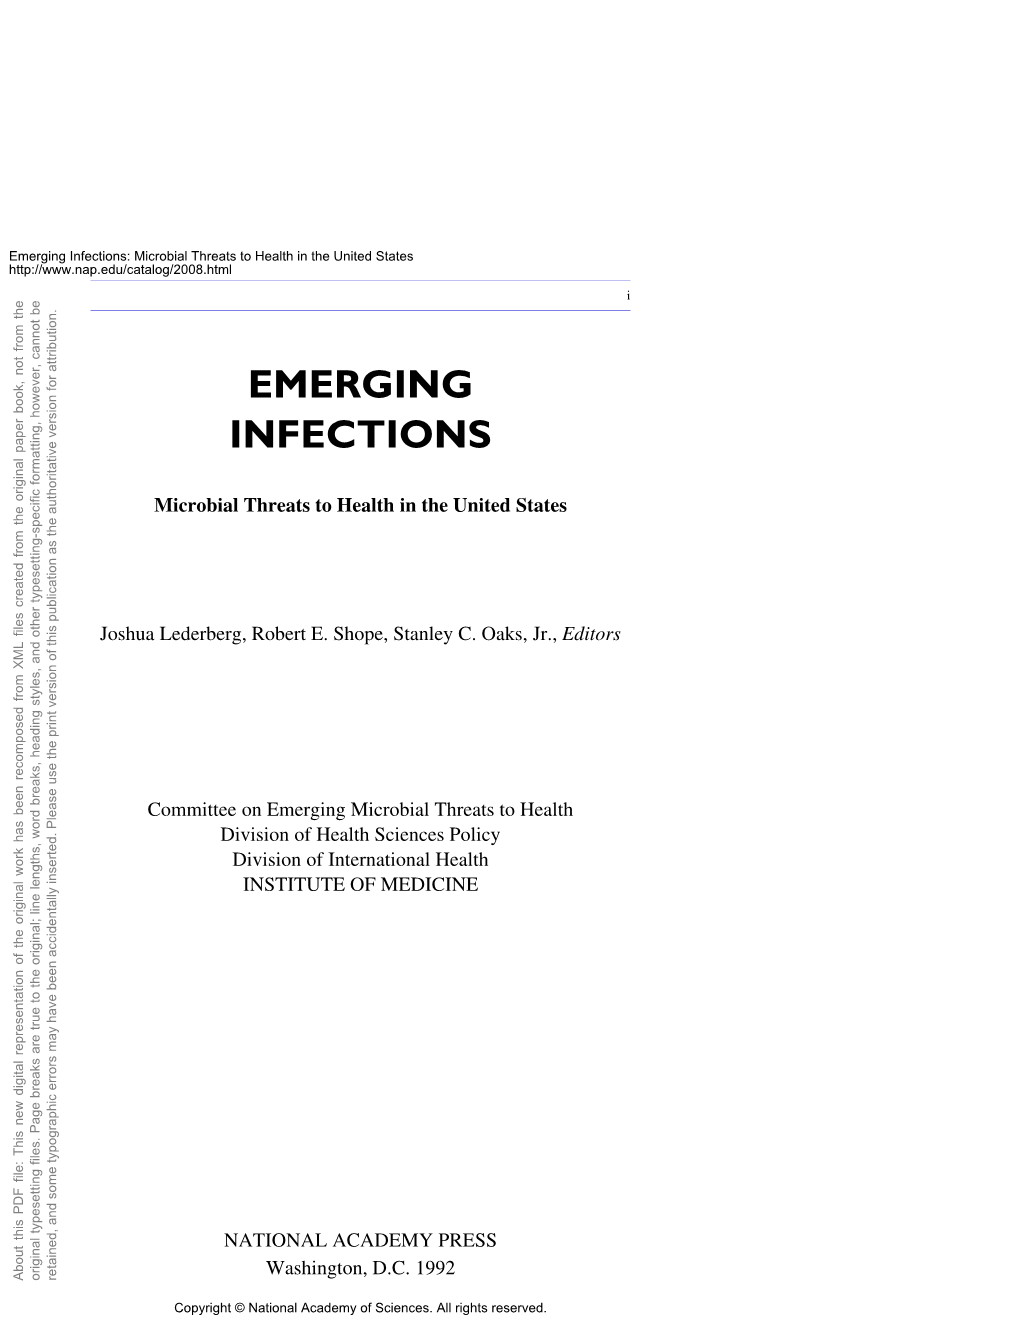 Emerging Infections: Microbial Threats to Health in the United States I